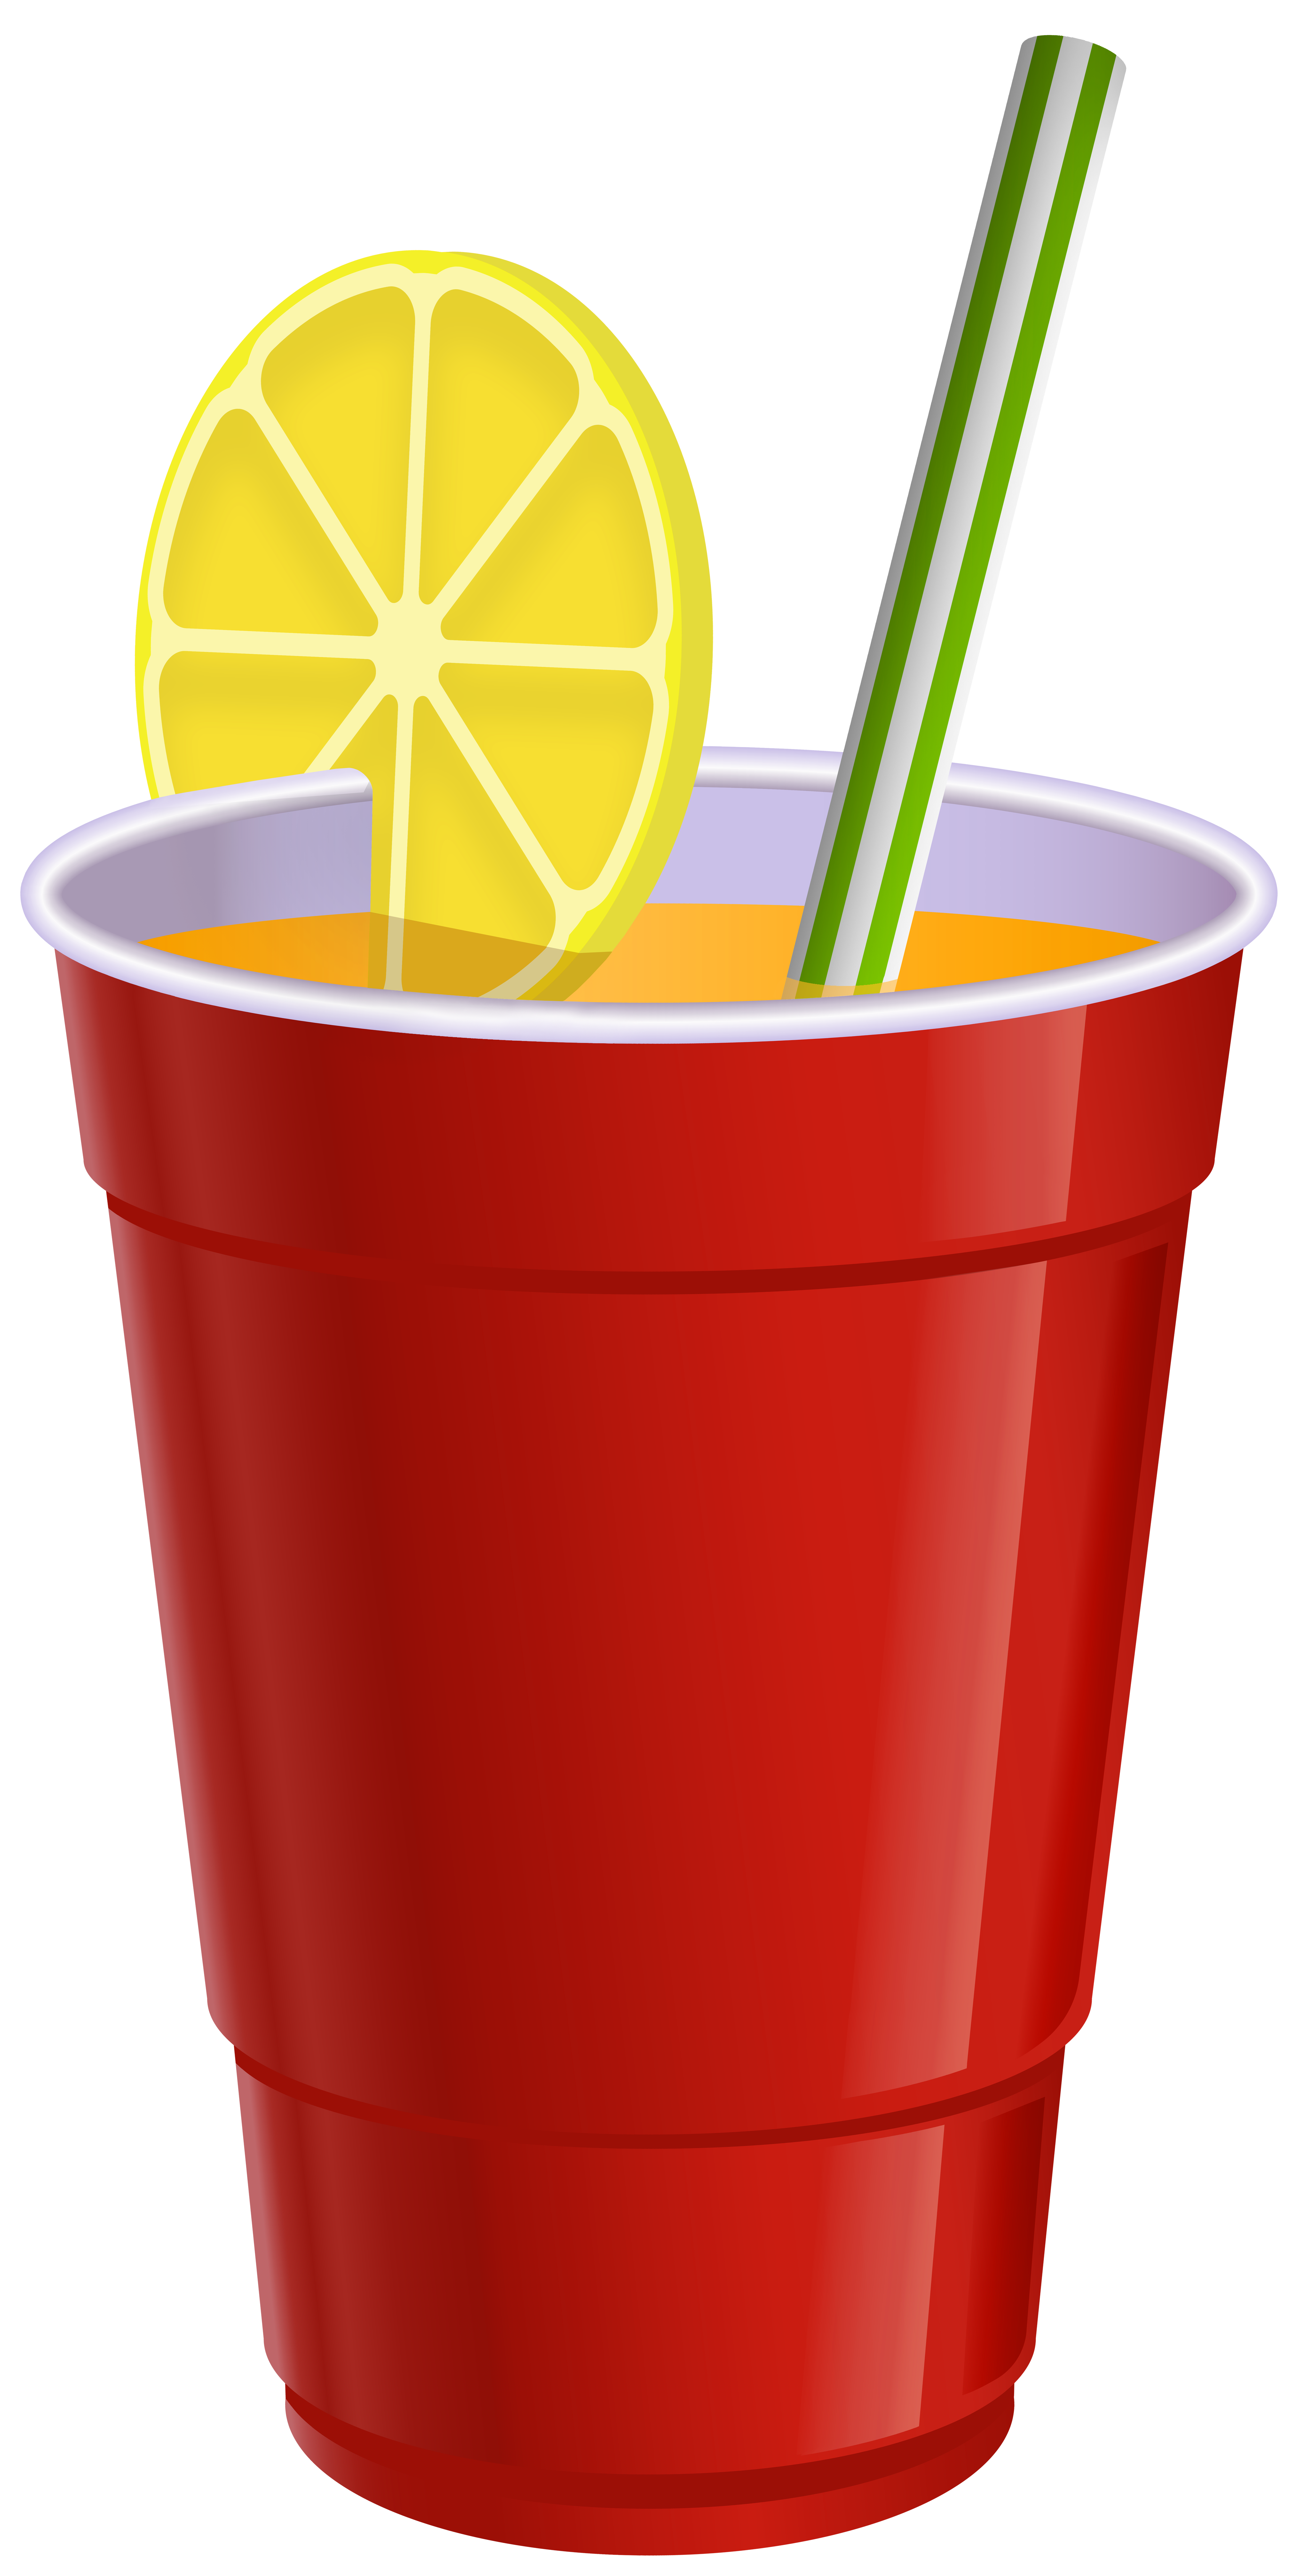 https://gallery.yopriceville.com/var/albums/Free-Clipart-Pictures/Drinks-PNG-/Drink_in_Plastic_Cup_Transparent_Image.png?m=1552493716